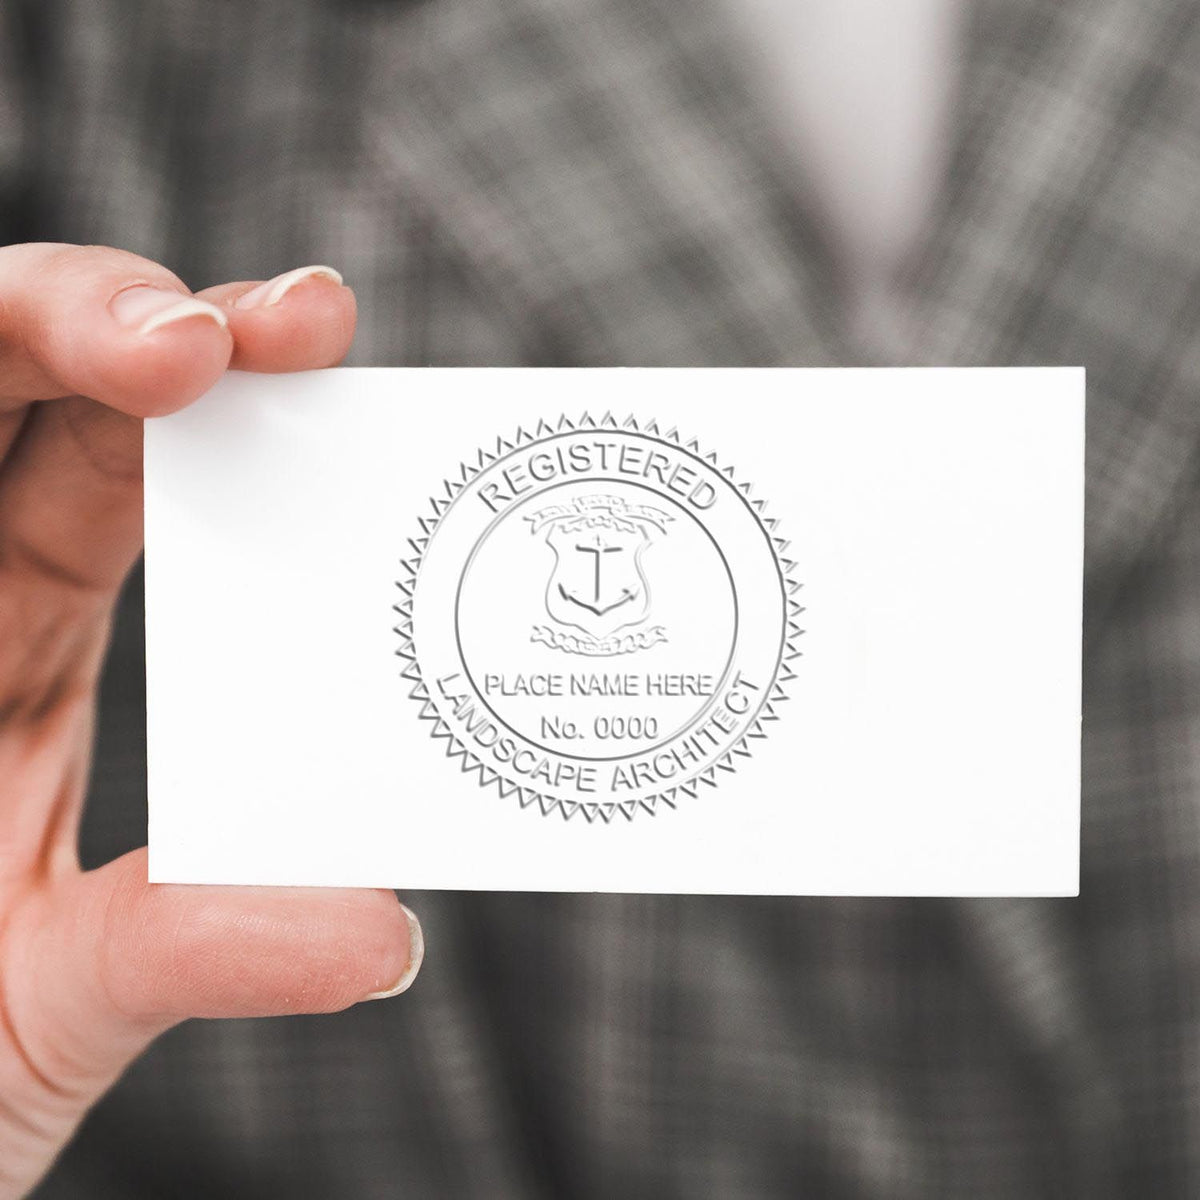 An in use photo of the Gift Rhode Island Landscape Architect Seal showing a sample imprint on a cardstock